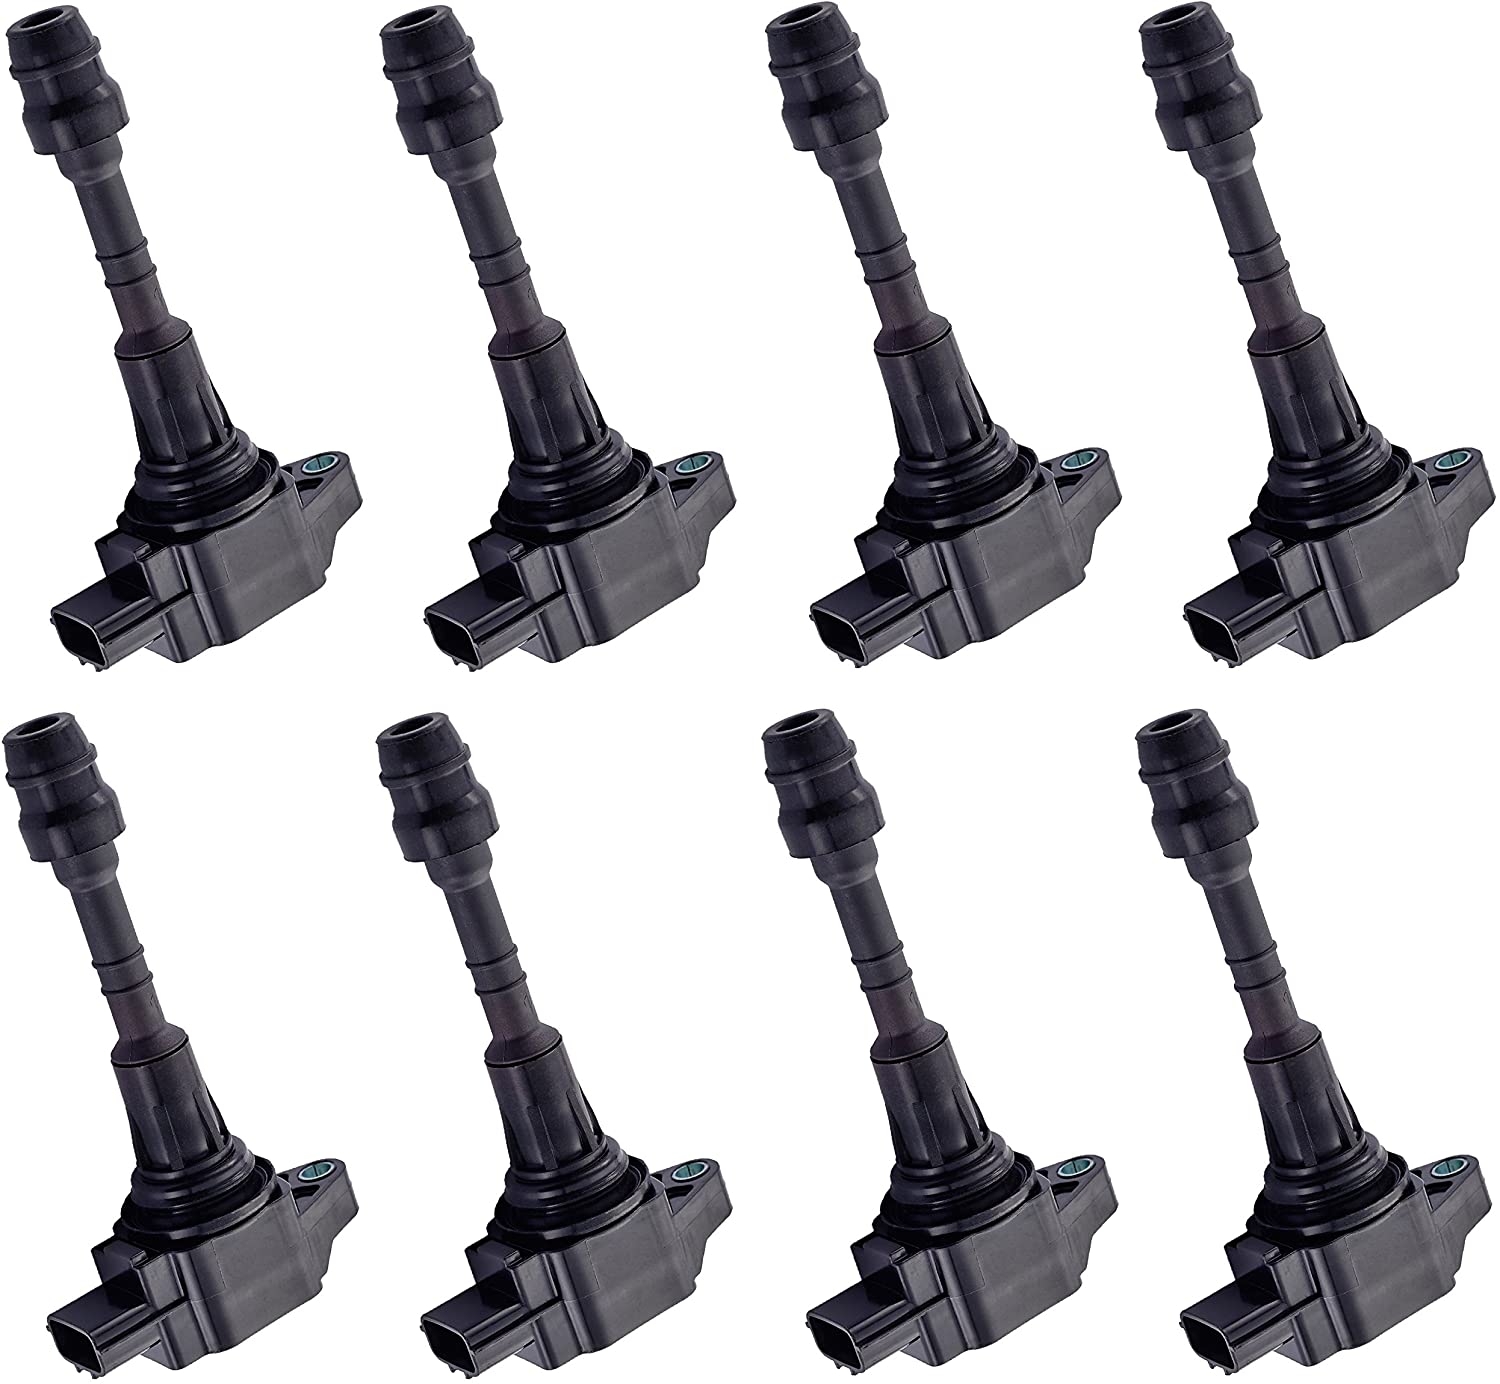 ENA Pack of 8 Ignition Coils Compatible with Nissan Titan Pathfinder Armada NV2500 NV3500 Infiniti QX56 4.0L 5.6L C1672 UF-551